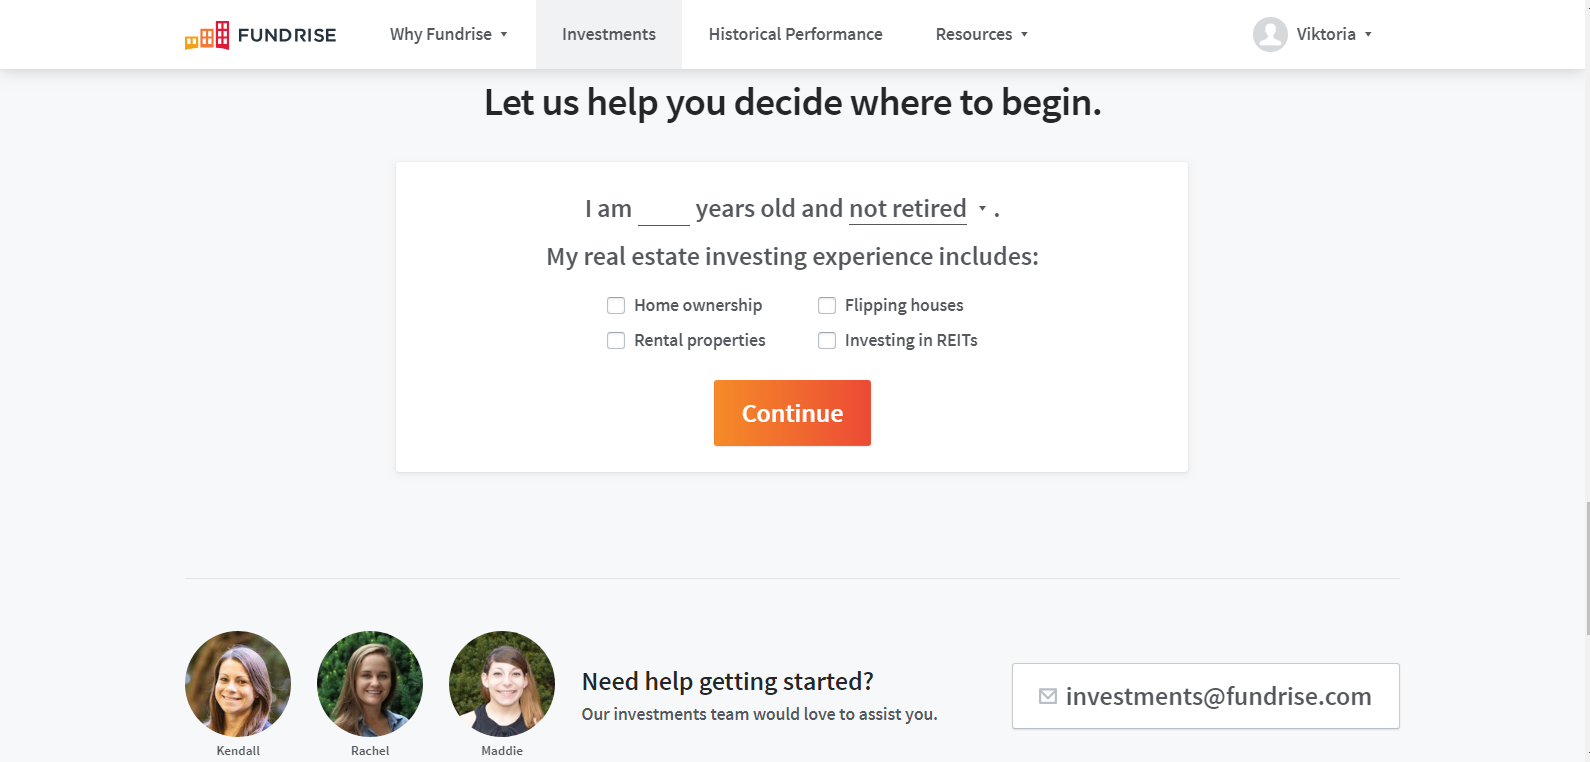 real-estate-crowdfunding-website-for-non-accredited-investors-3 How to create a real estate crowdfunding website for non-accredited investors?